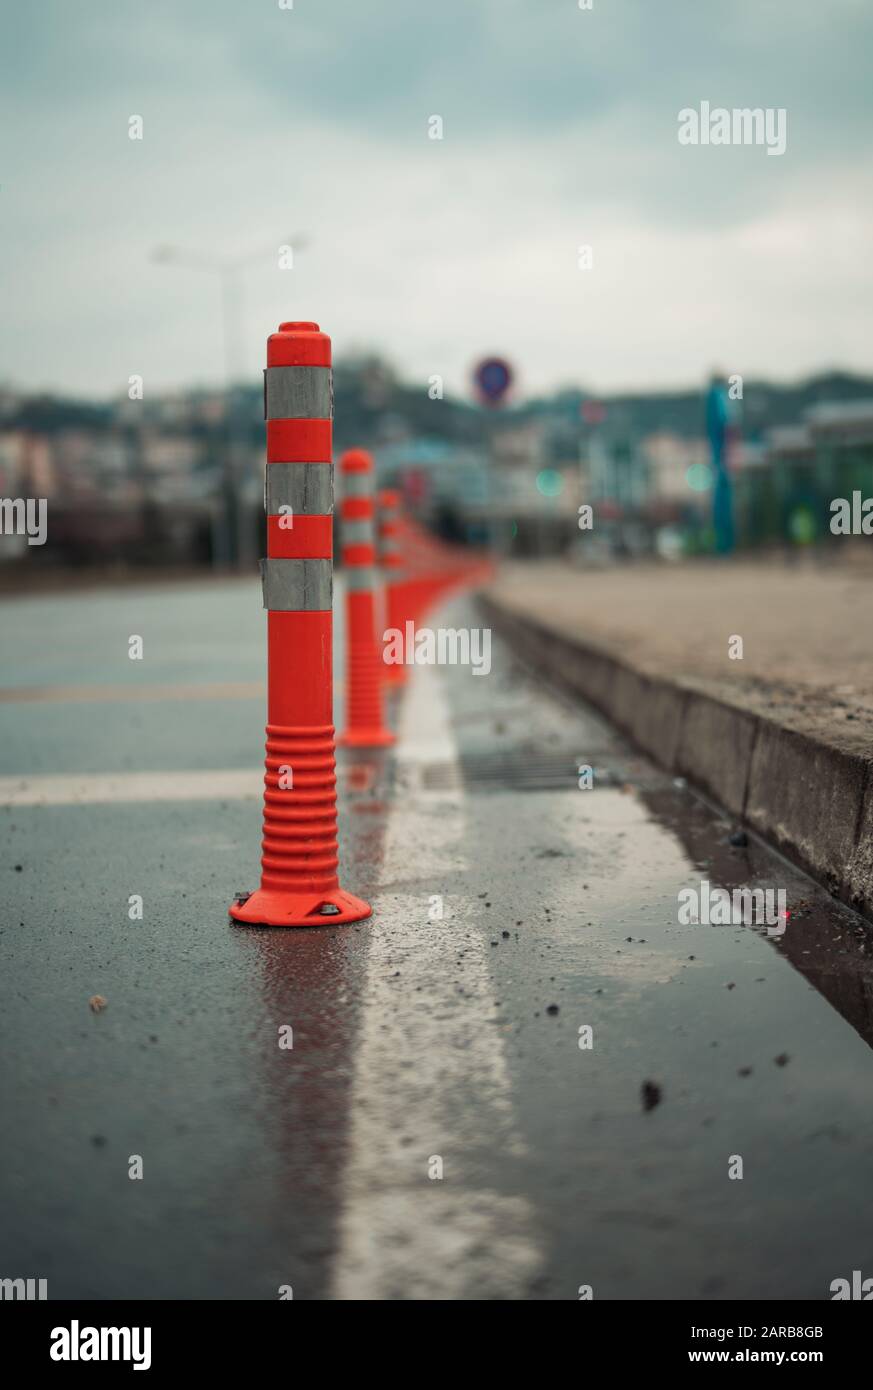 Traffic cones on an asphalt road in a cloudy weather Stock Photo